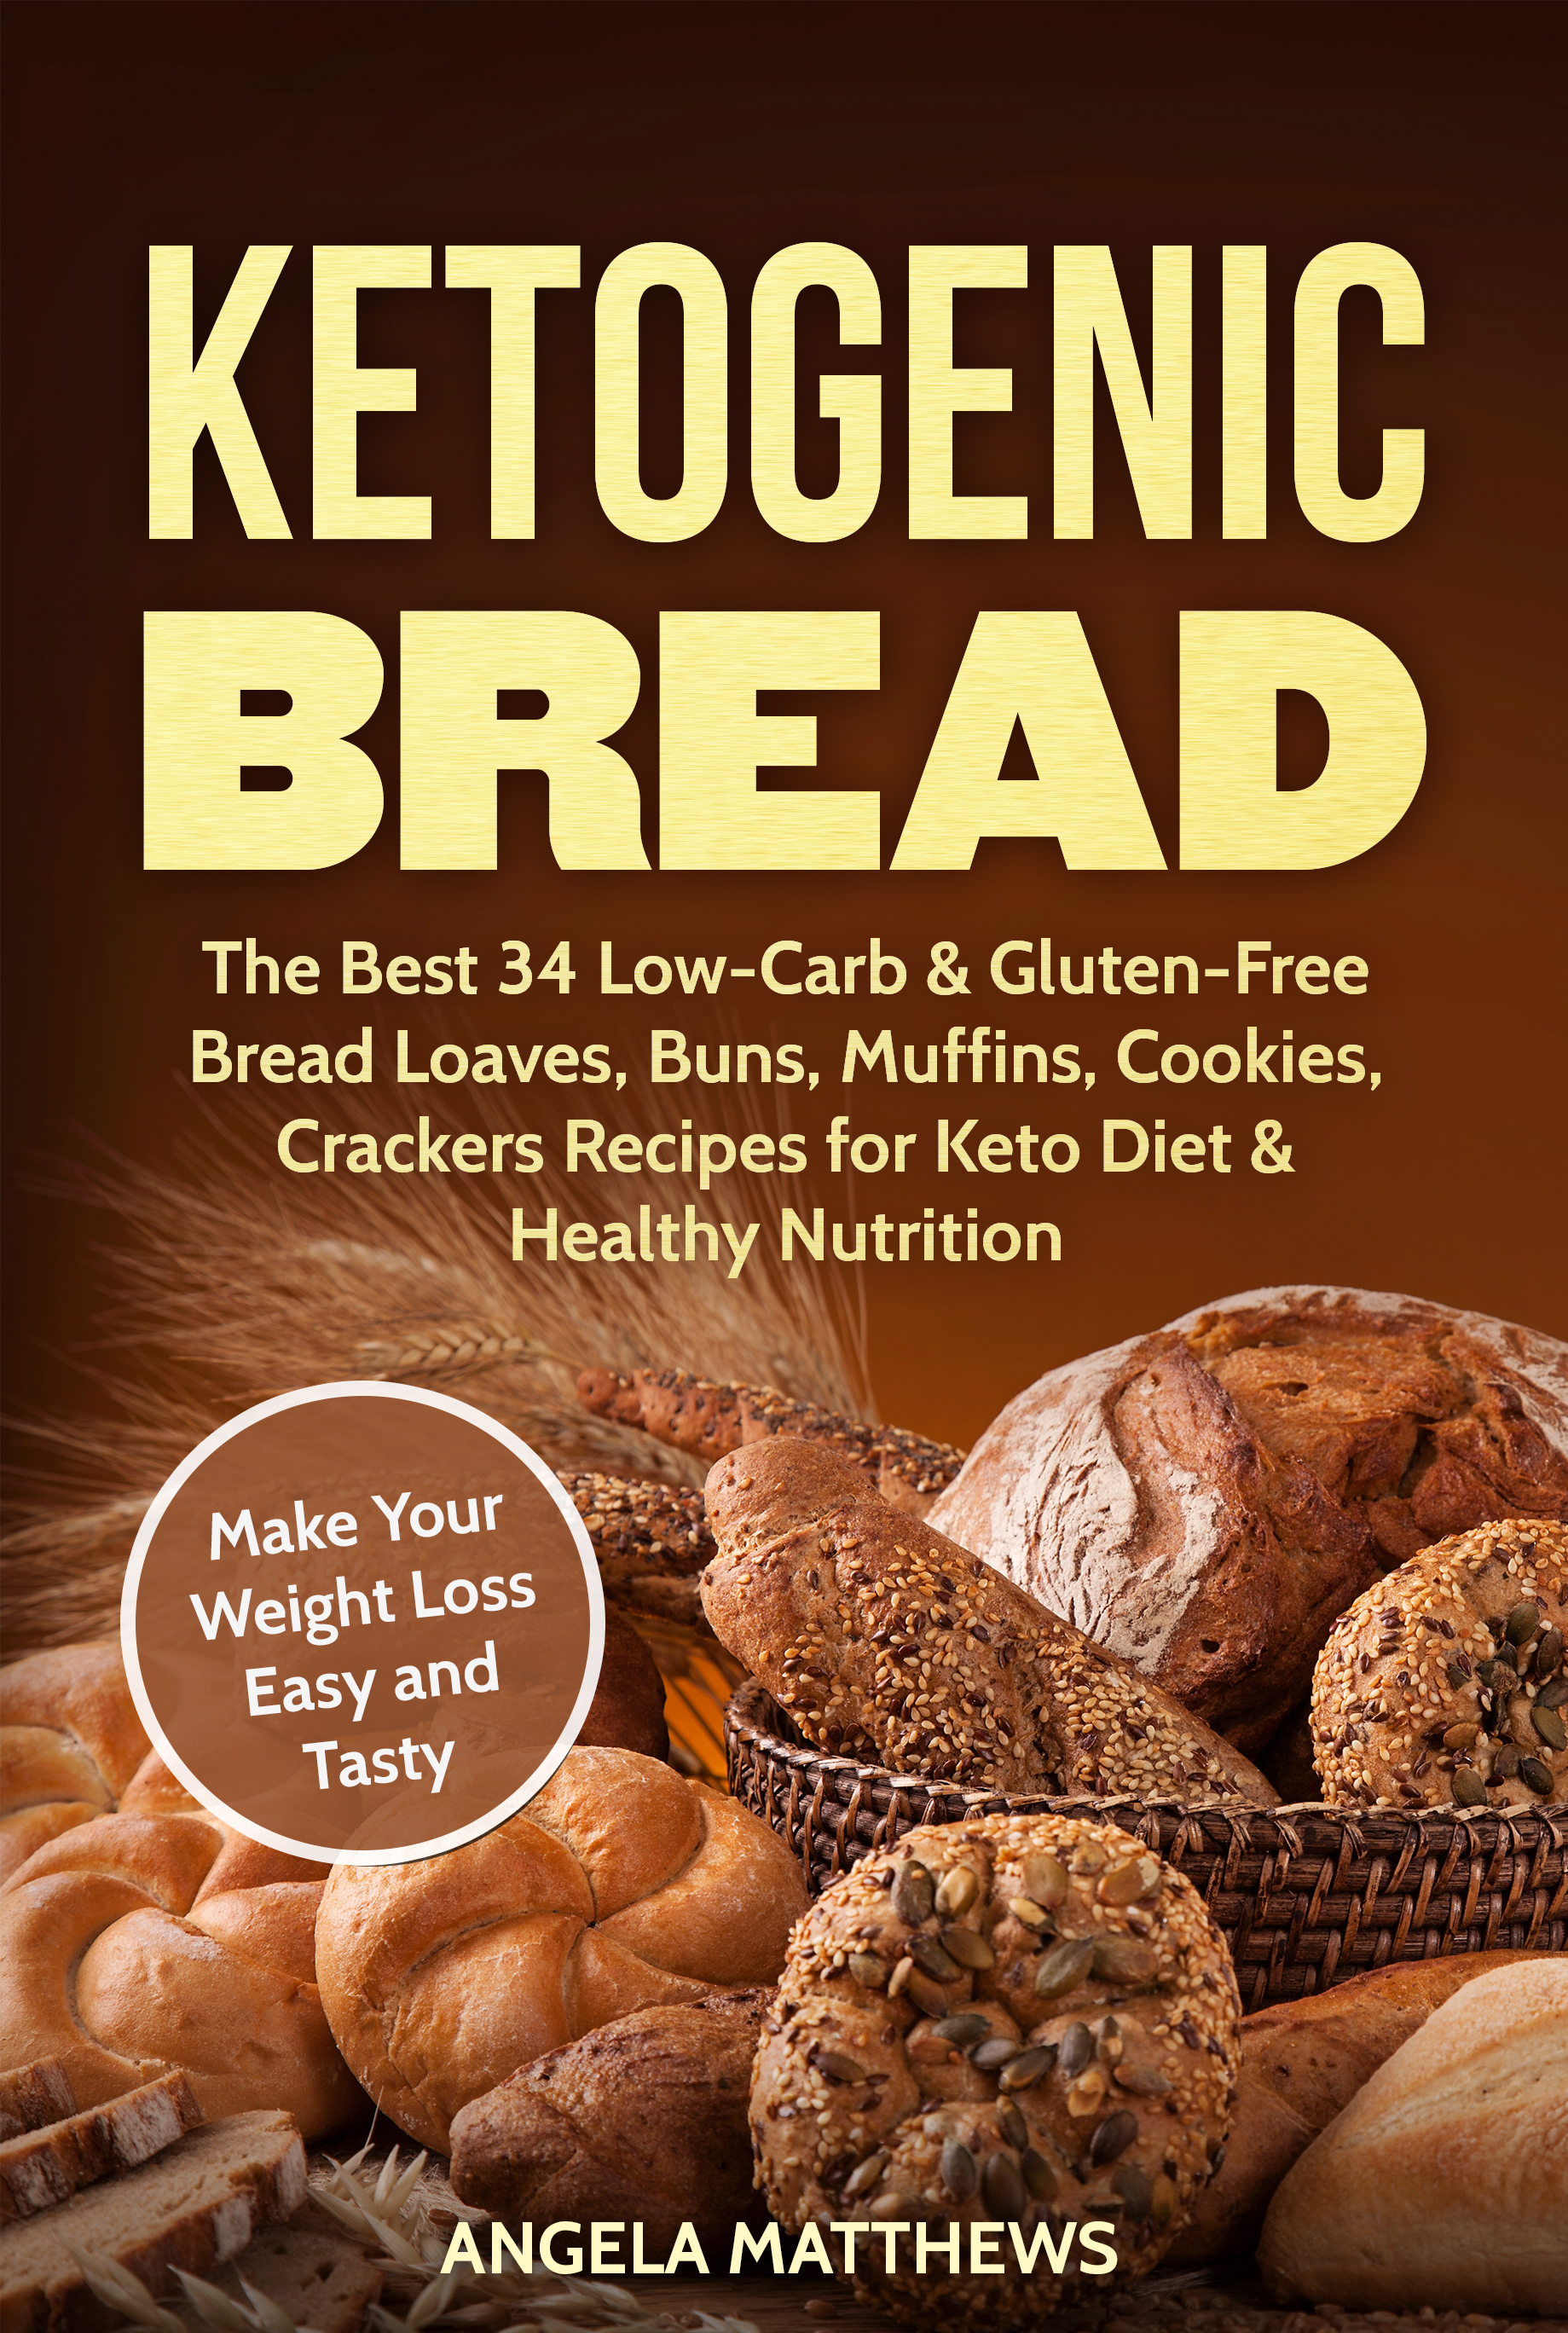 FREE: Ketogenic Bread: The Best 34 Low-Carb & Gluten-Free Bread Loaves, Buns, Muffins, Cookies, Crackers Recipes for Keto Diet & Healthy Nutrition: Make Your Weight Loss Easy and Tasty by Angela Matthews